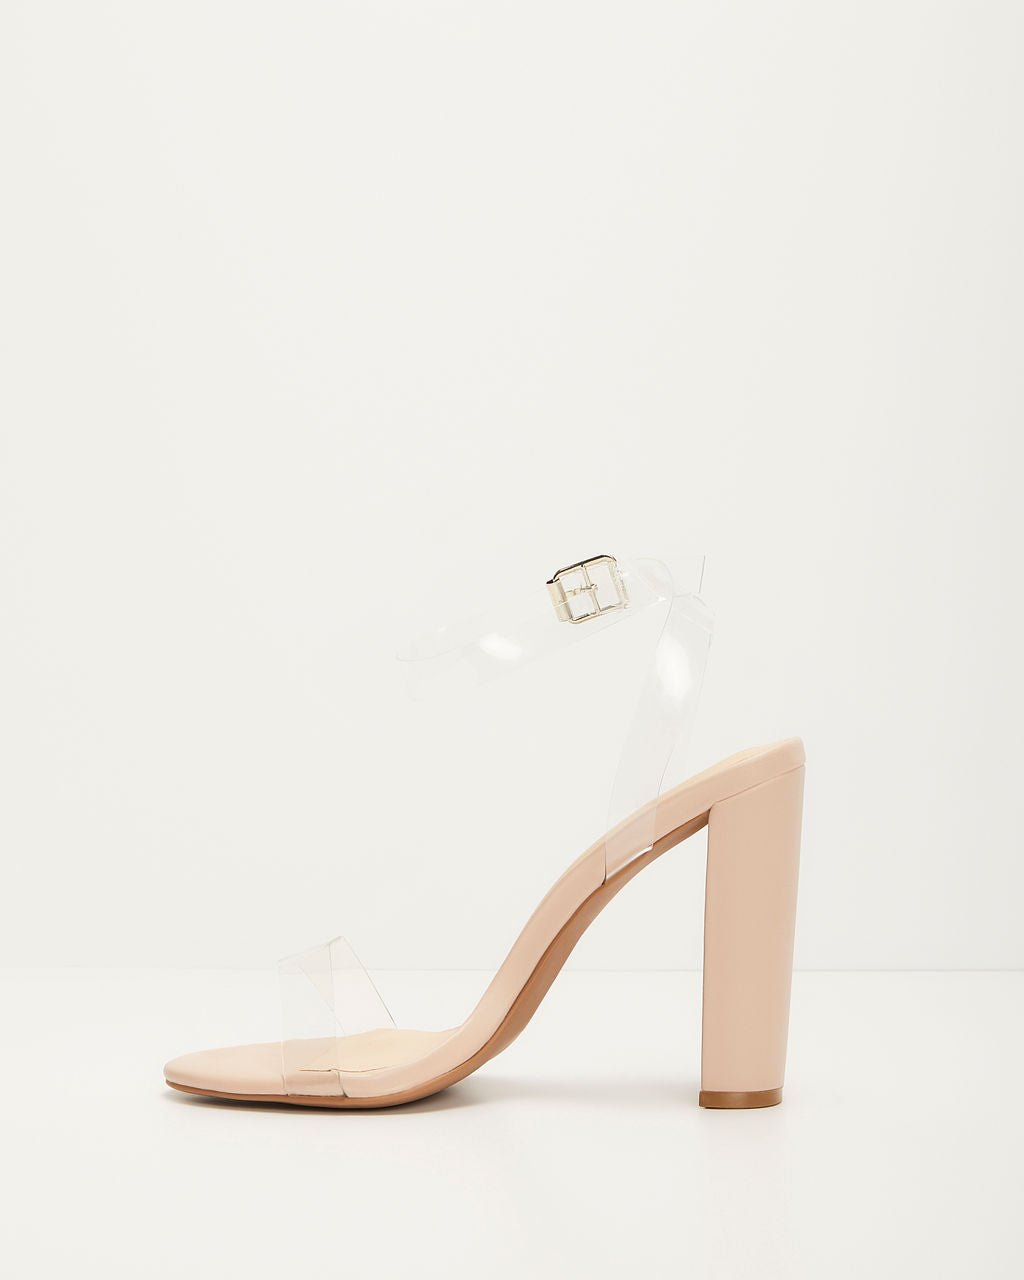 Buy Beige Textured Clear Strap Heels by Tic Tac Toe Footwear Online at Aza  Fashions.